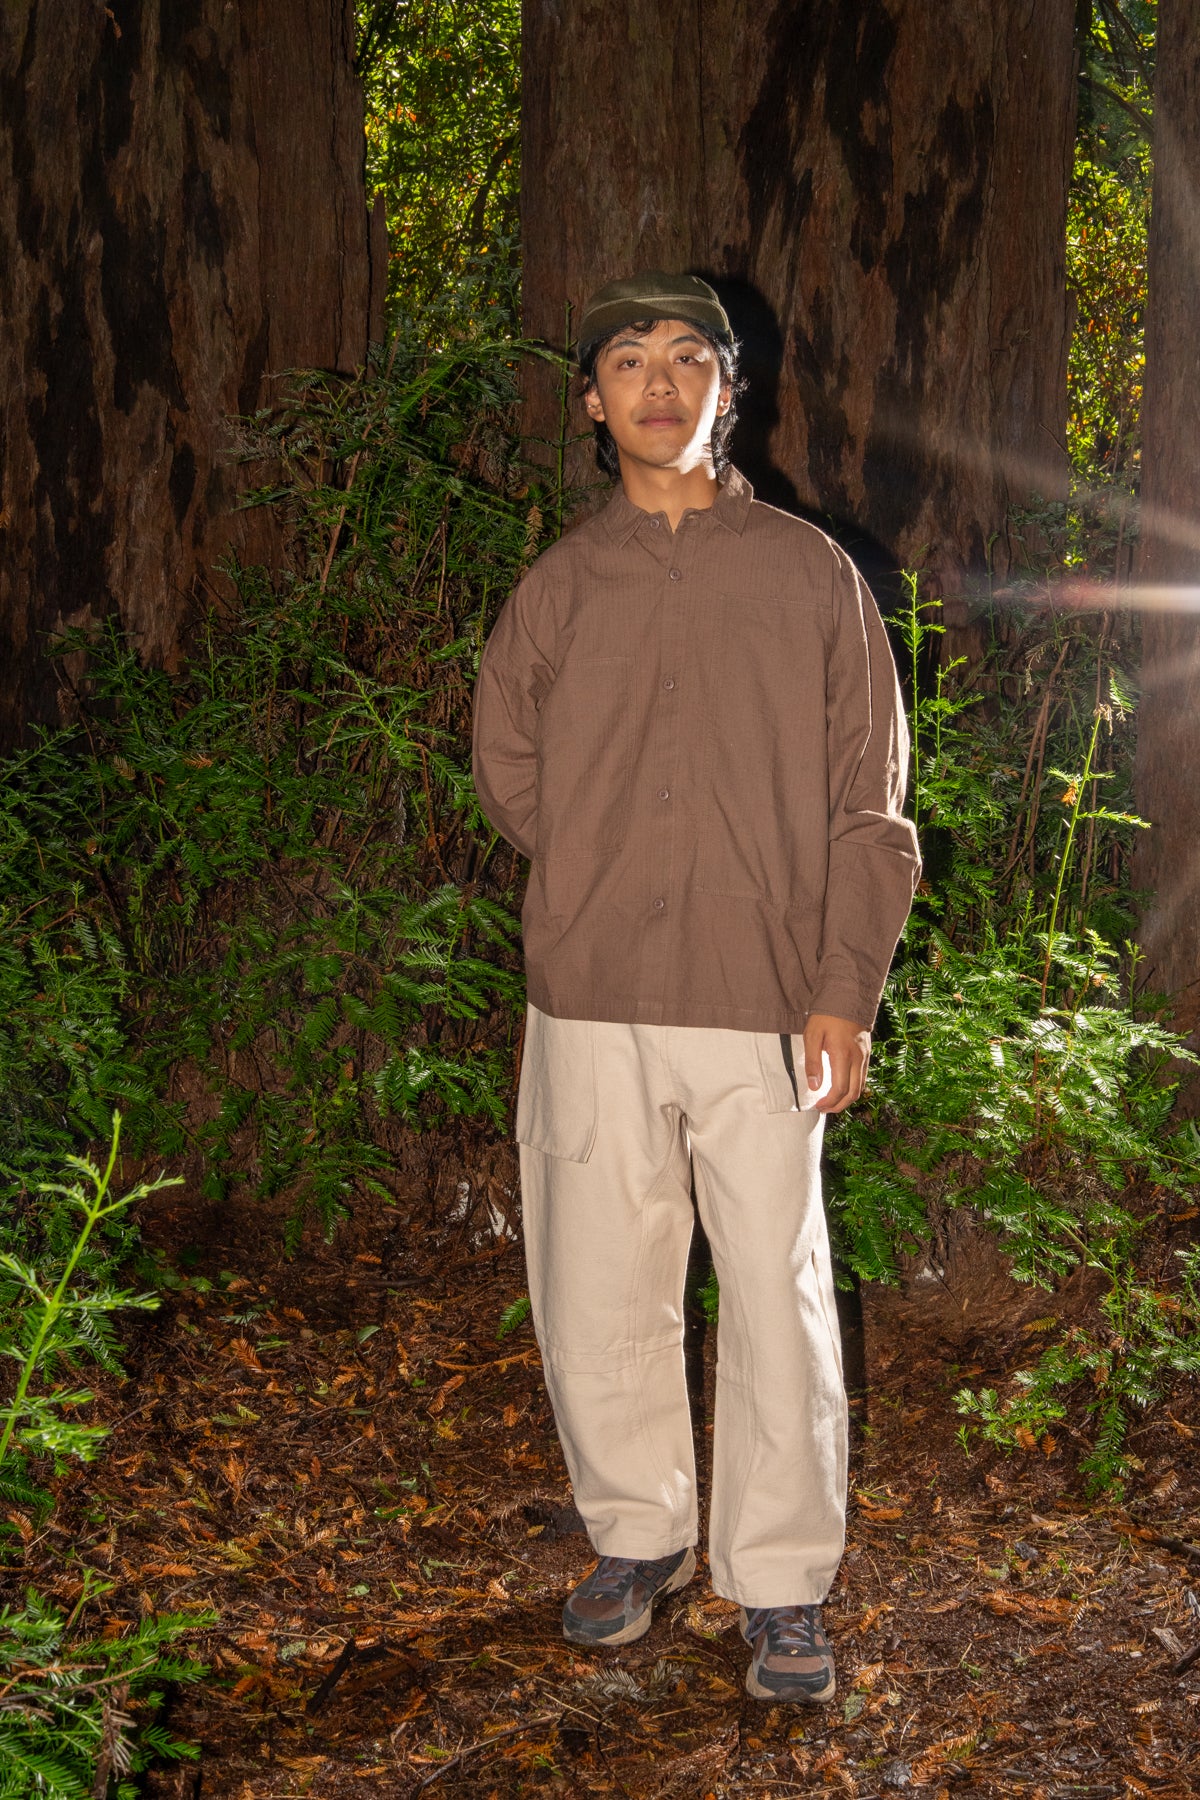 MS-109 RESEARCH SHIRT - CHESTNUT